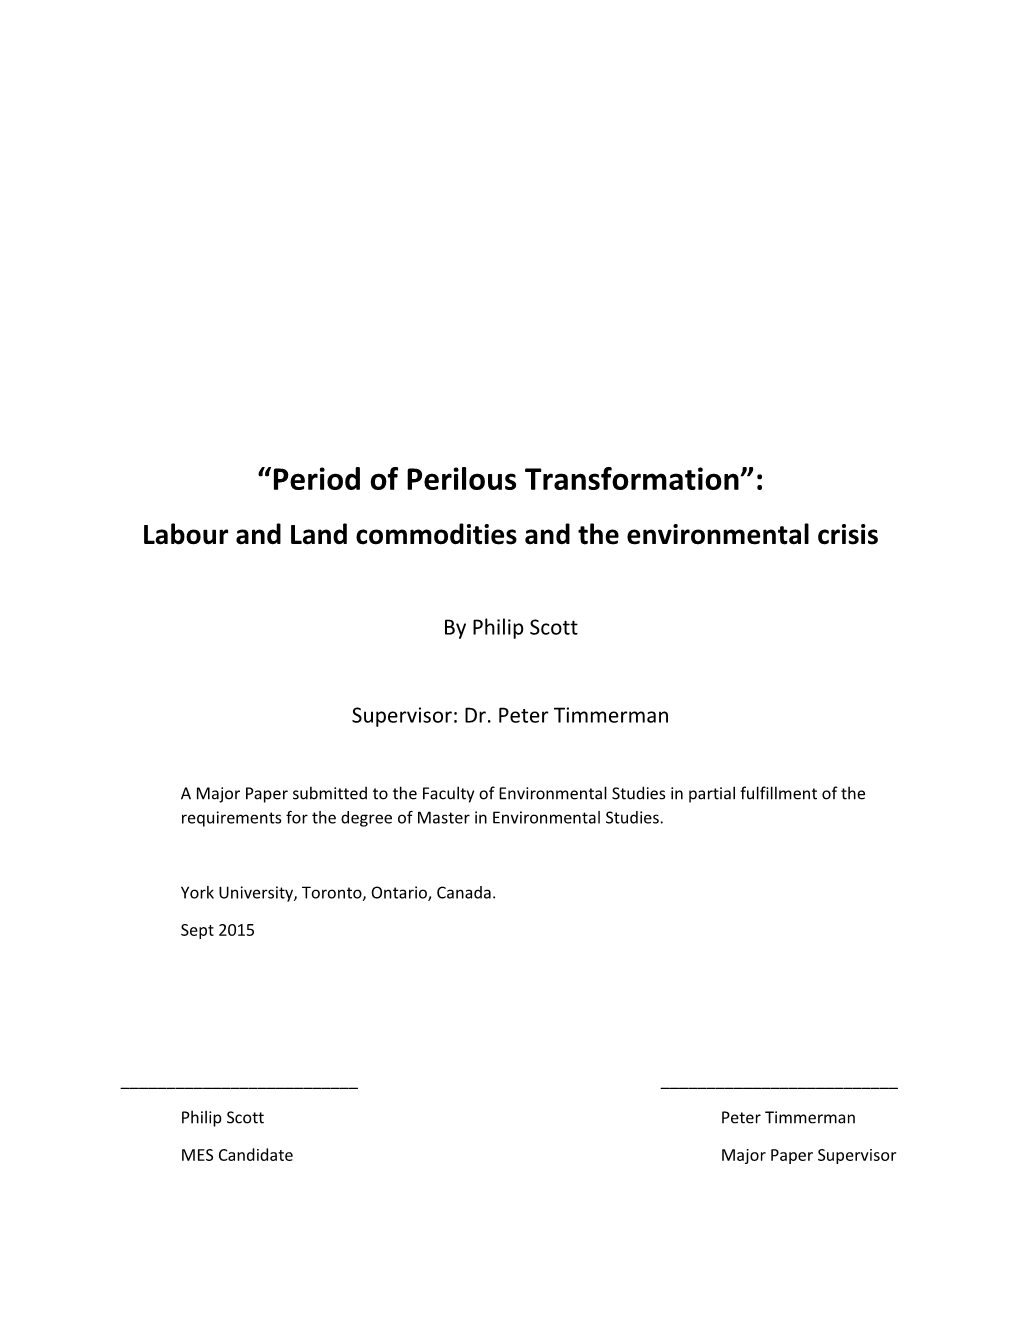 “Period of Perilous Transformation”: Labour and Land Commodities and the Environmental Crisis